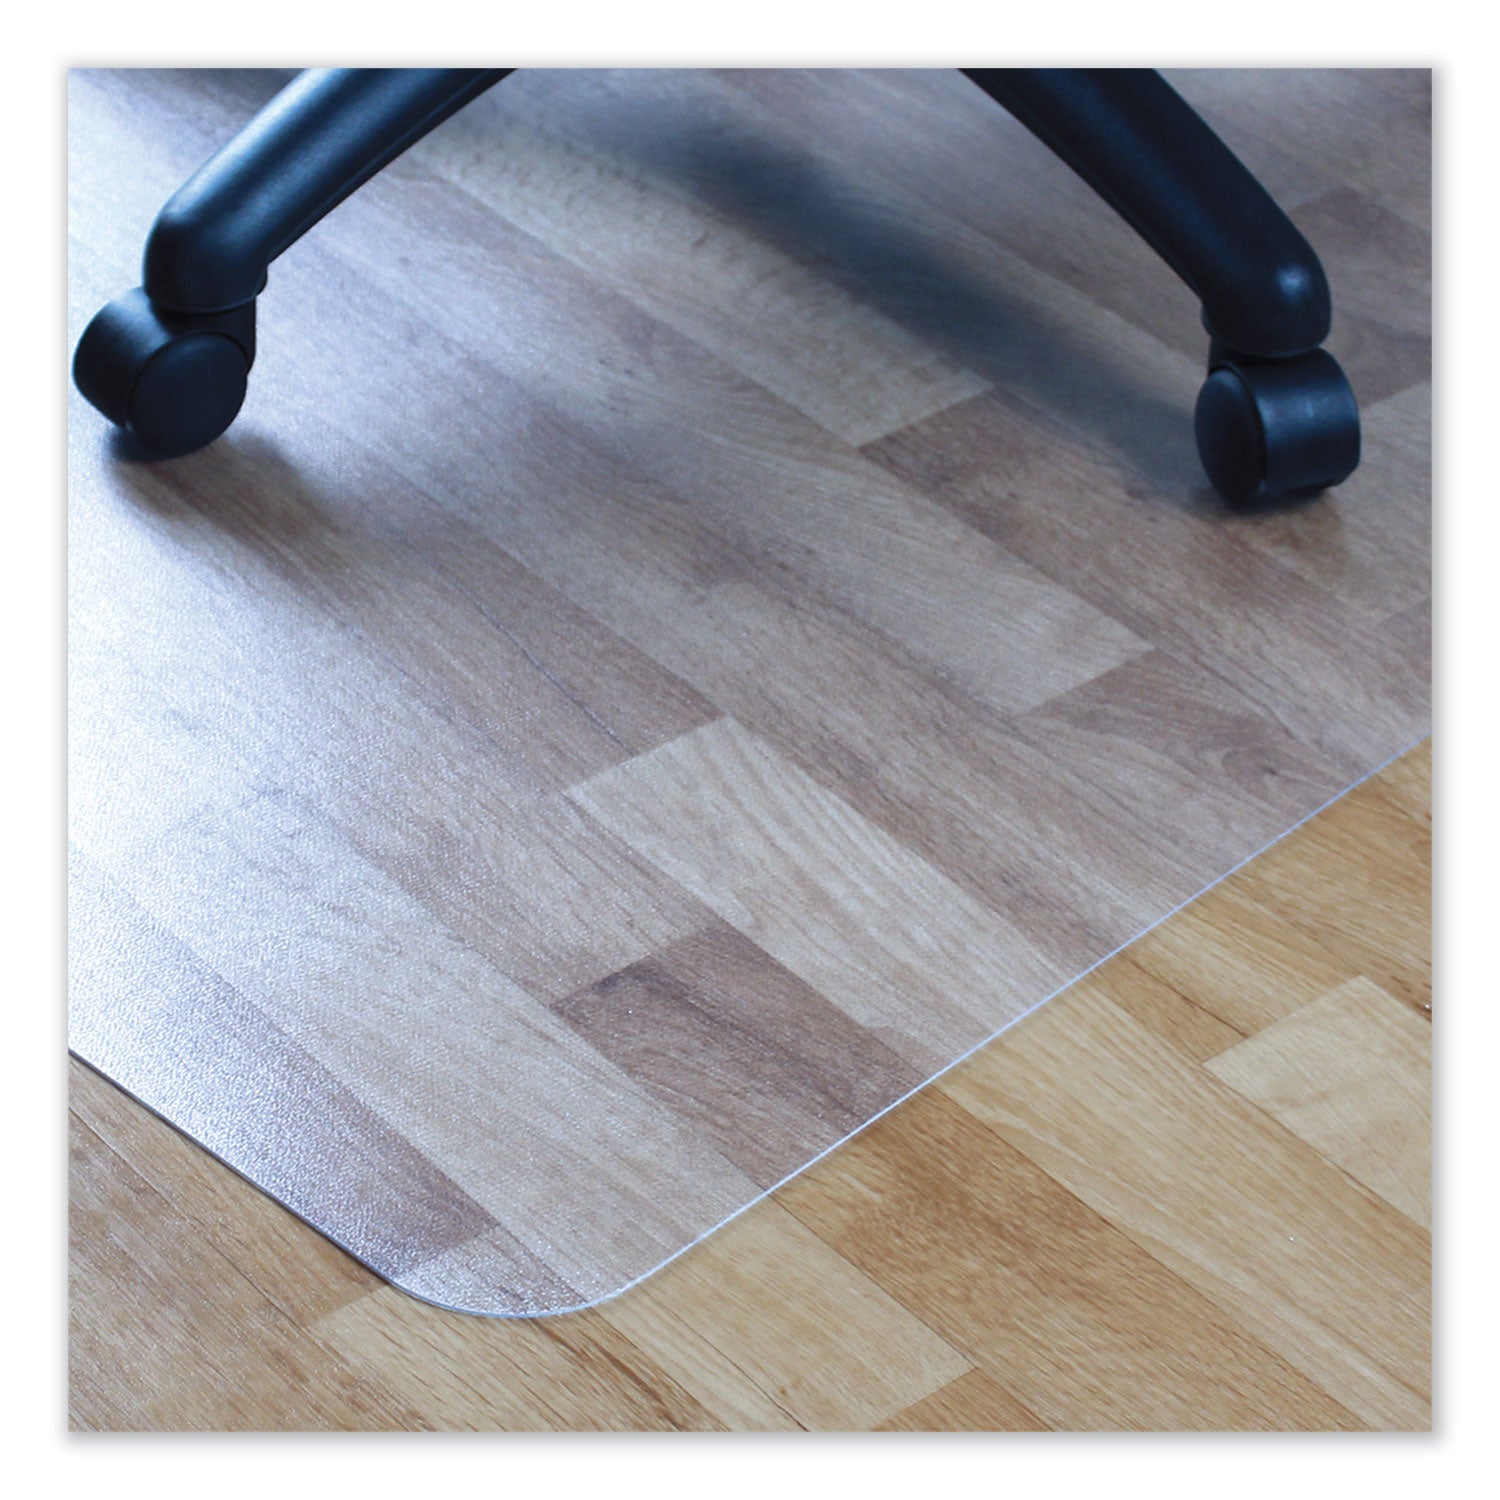 Cleartex Ultimat XXL Polycarbonate Chair Mat for Hard Floors, 60 x 60, Clear - 